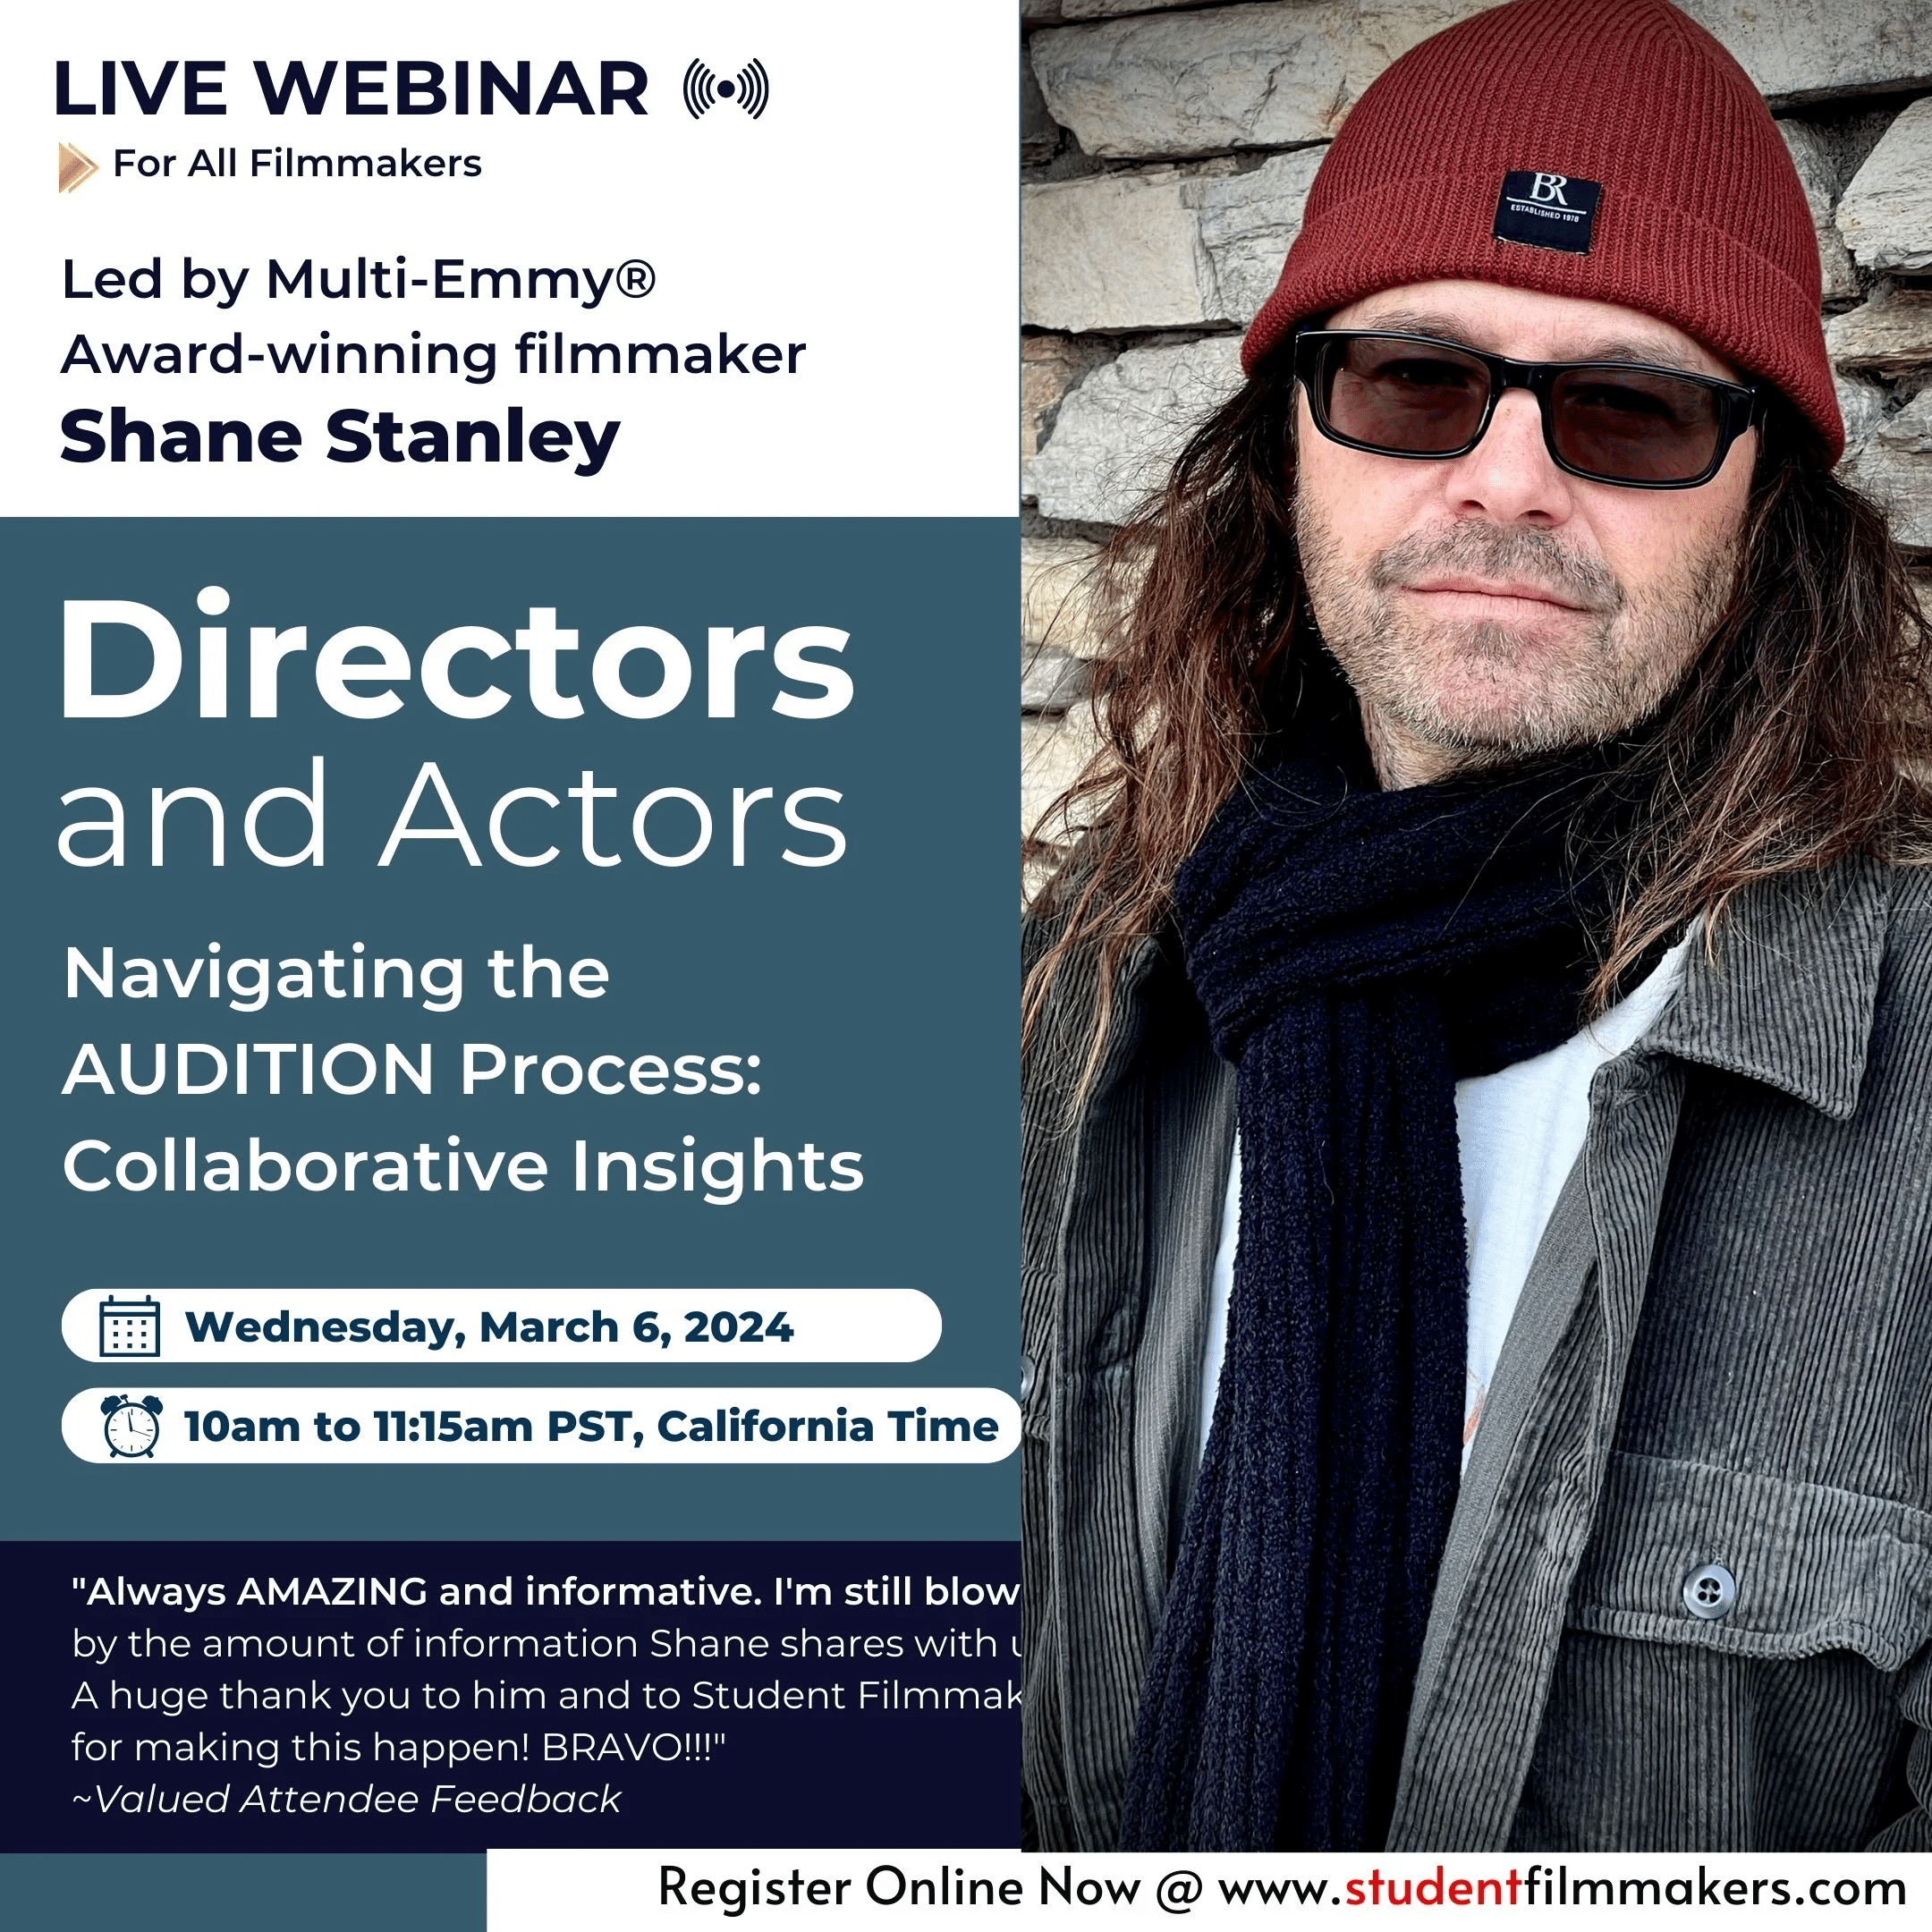 Live Webinar: “Directors and Actors: Navigating the AUDITION Process” with Shane Stanley, Multi-Emmy® Award-Winning Filmmaker